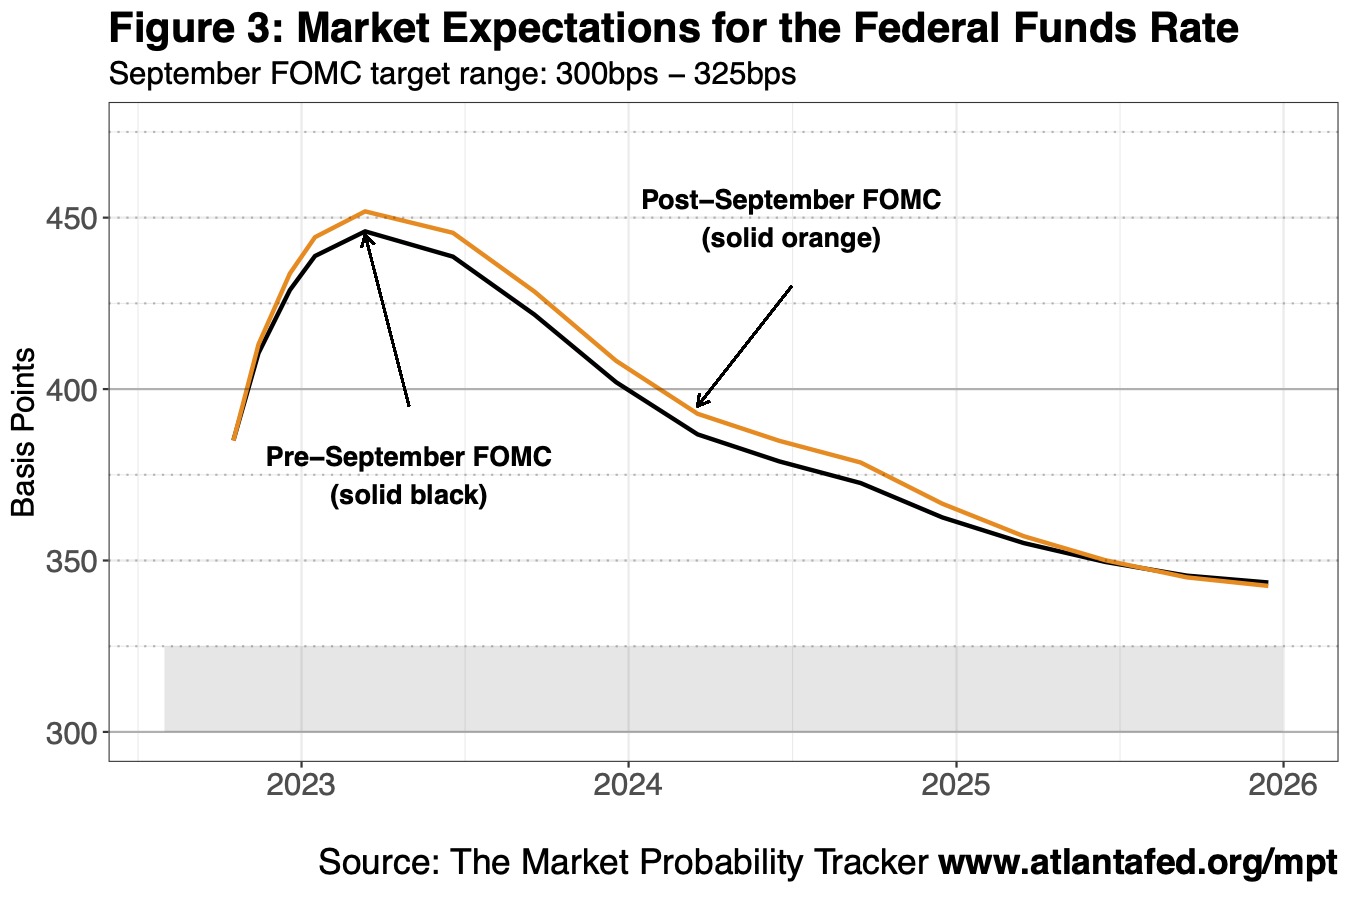 Chart 3 of 3: Market Expecations for the Federal Funds Rate